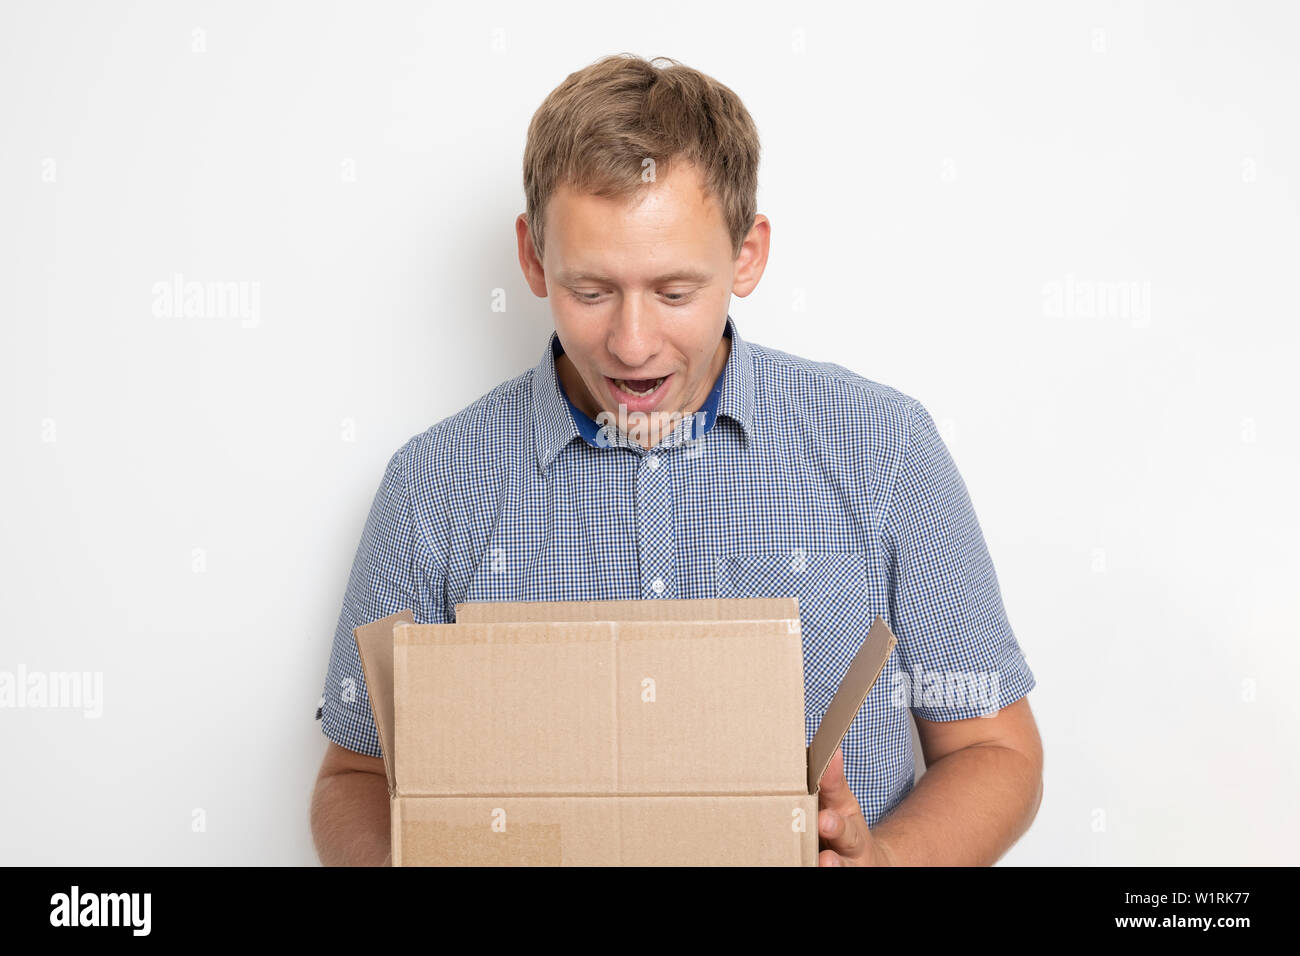 Description: curious man looking inside a cardboard box he holds in his hands on a white background Stock Photo